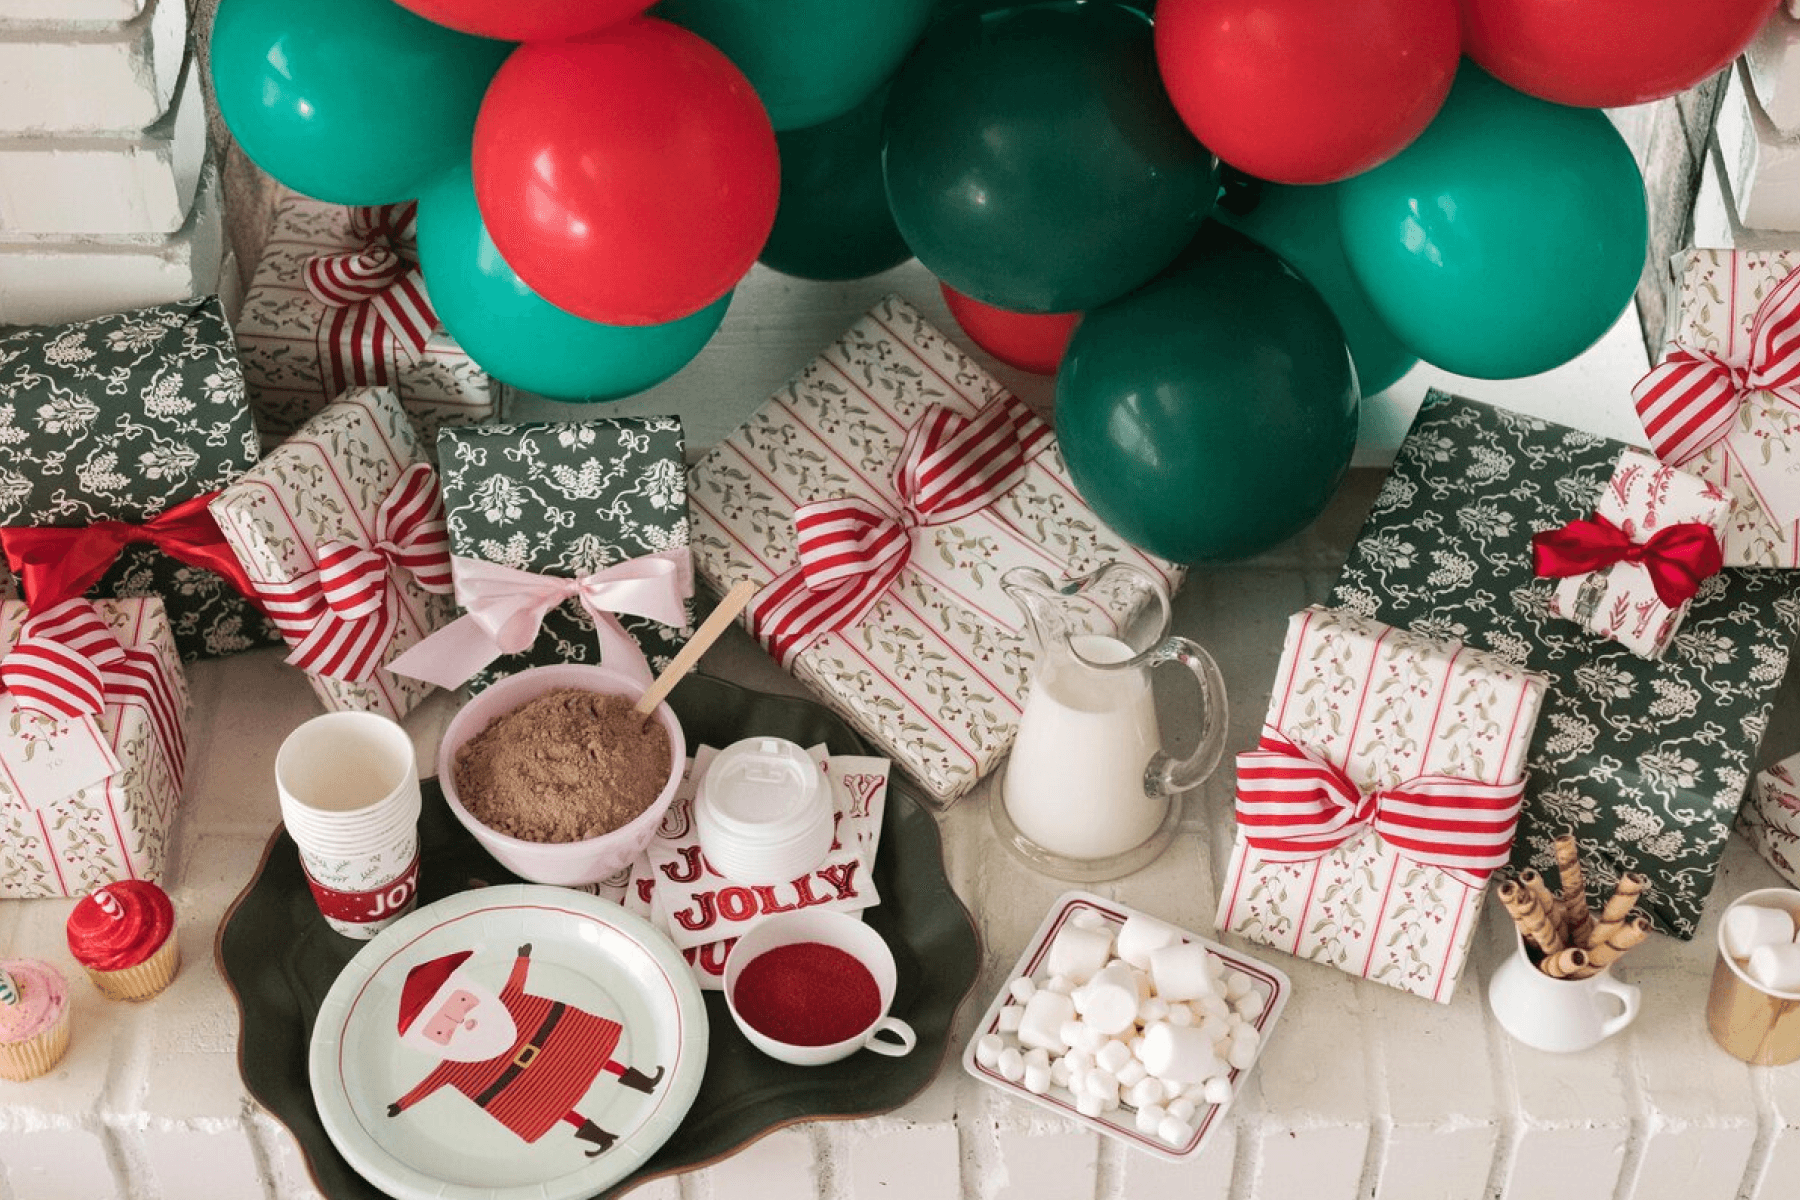 A crowded display of red and green wrapped Christmas presents and balloons with a tray of hot chocolate and marshmallows.